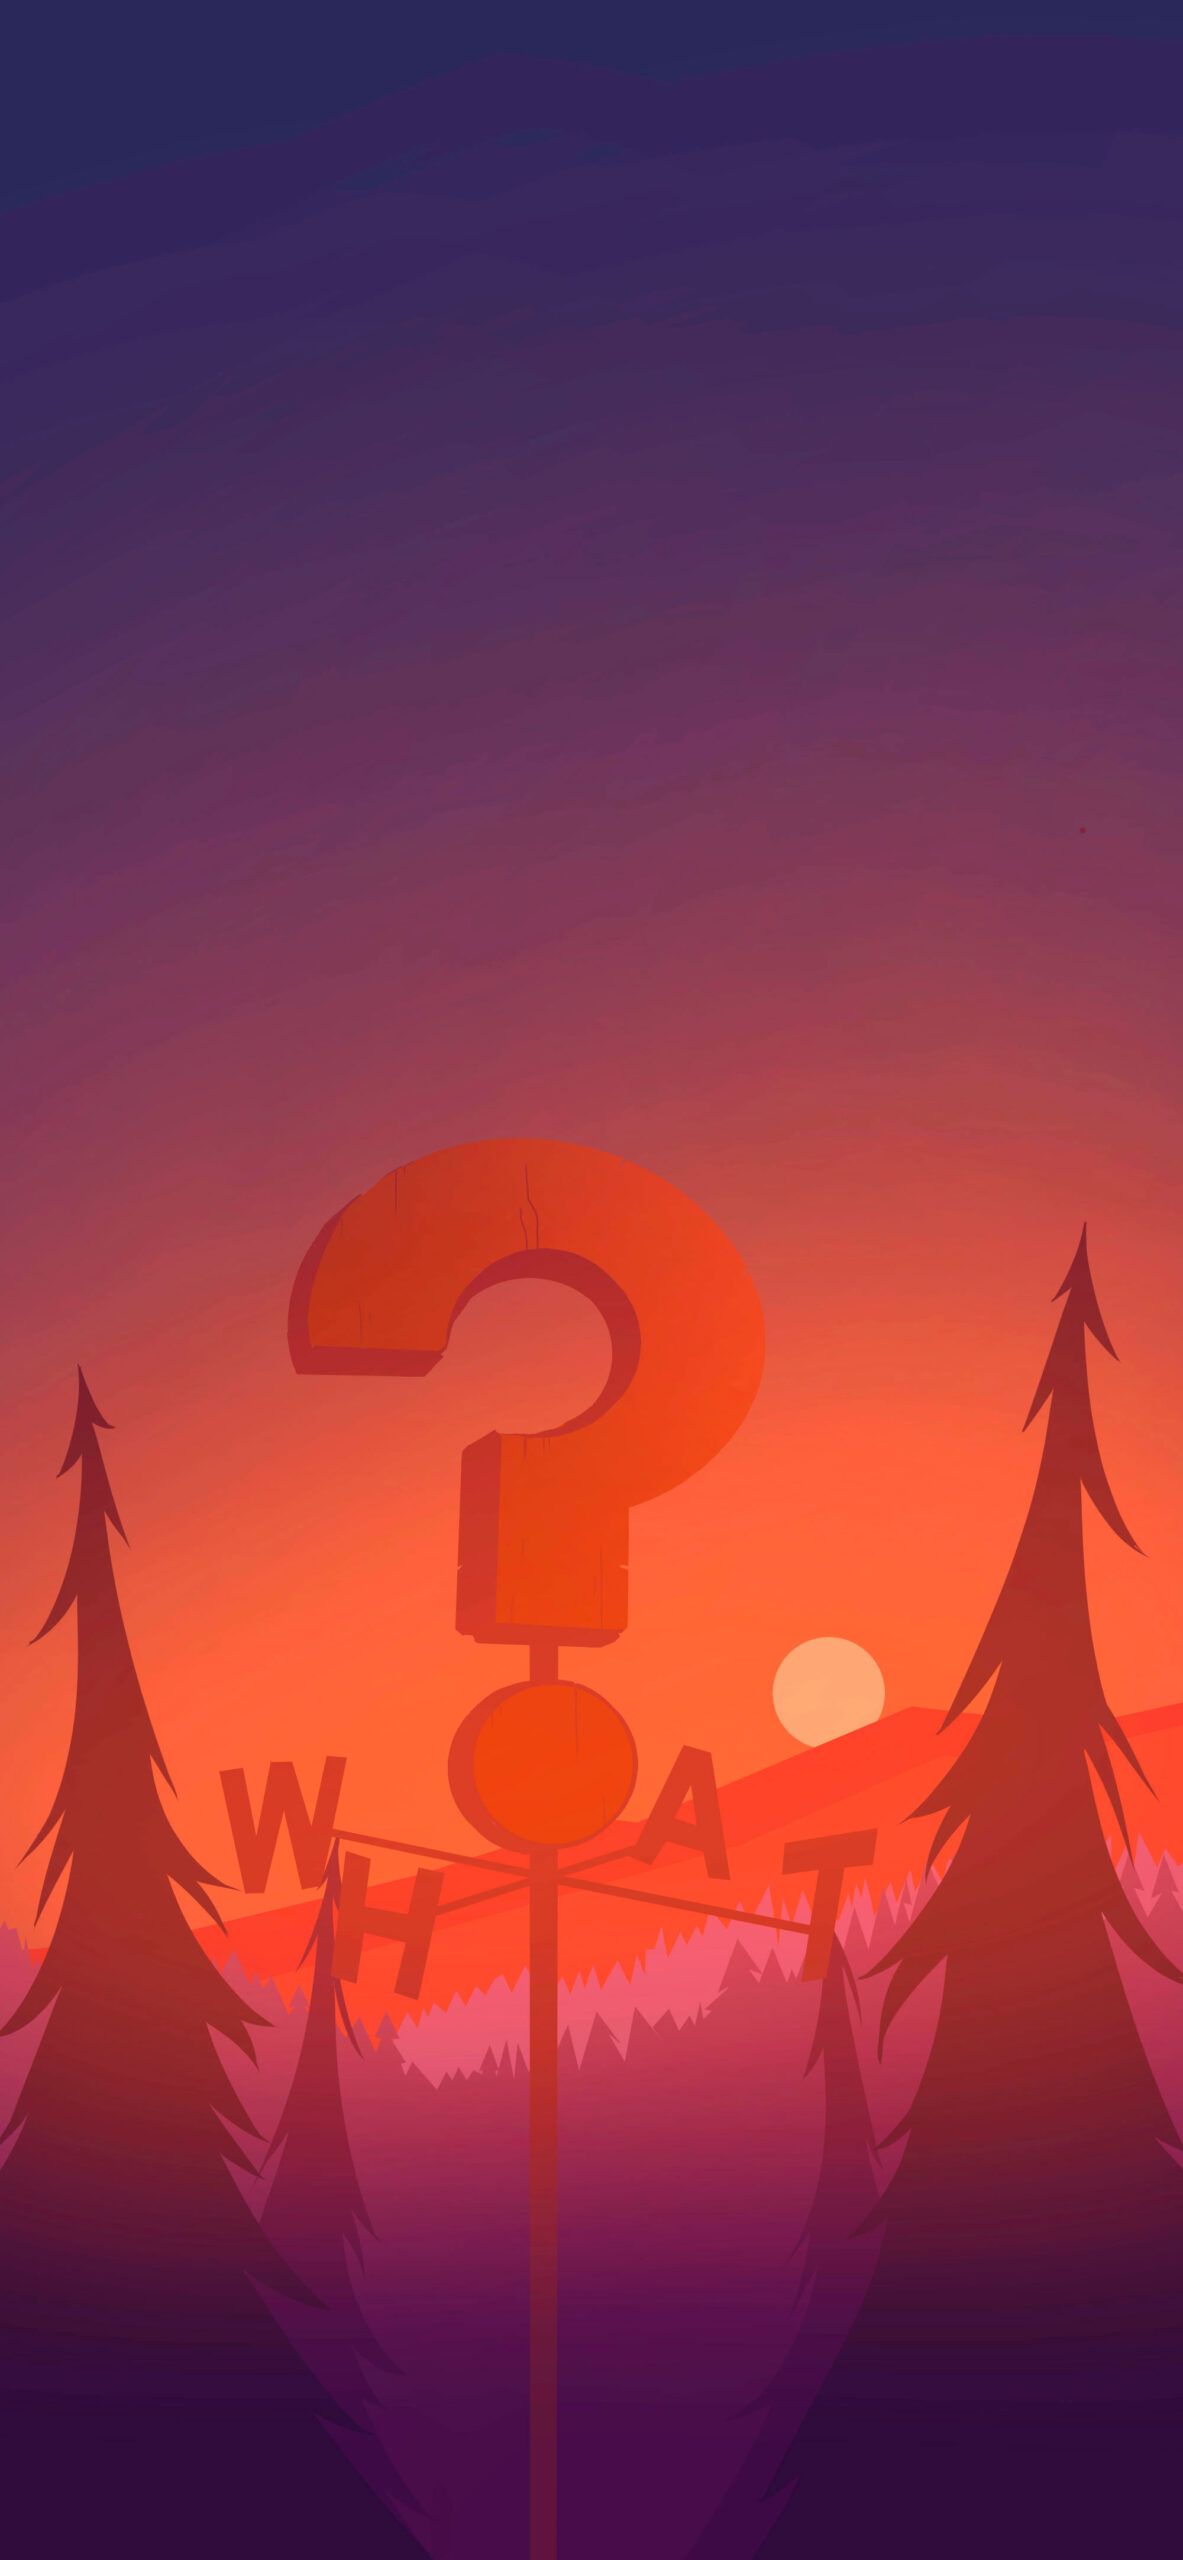 Illustration of a question mark in a forest at sunset - Sunset, sunrise